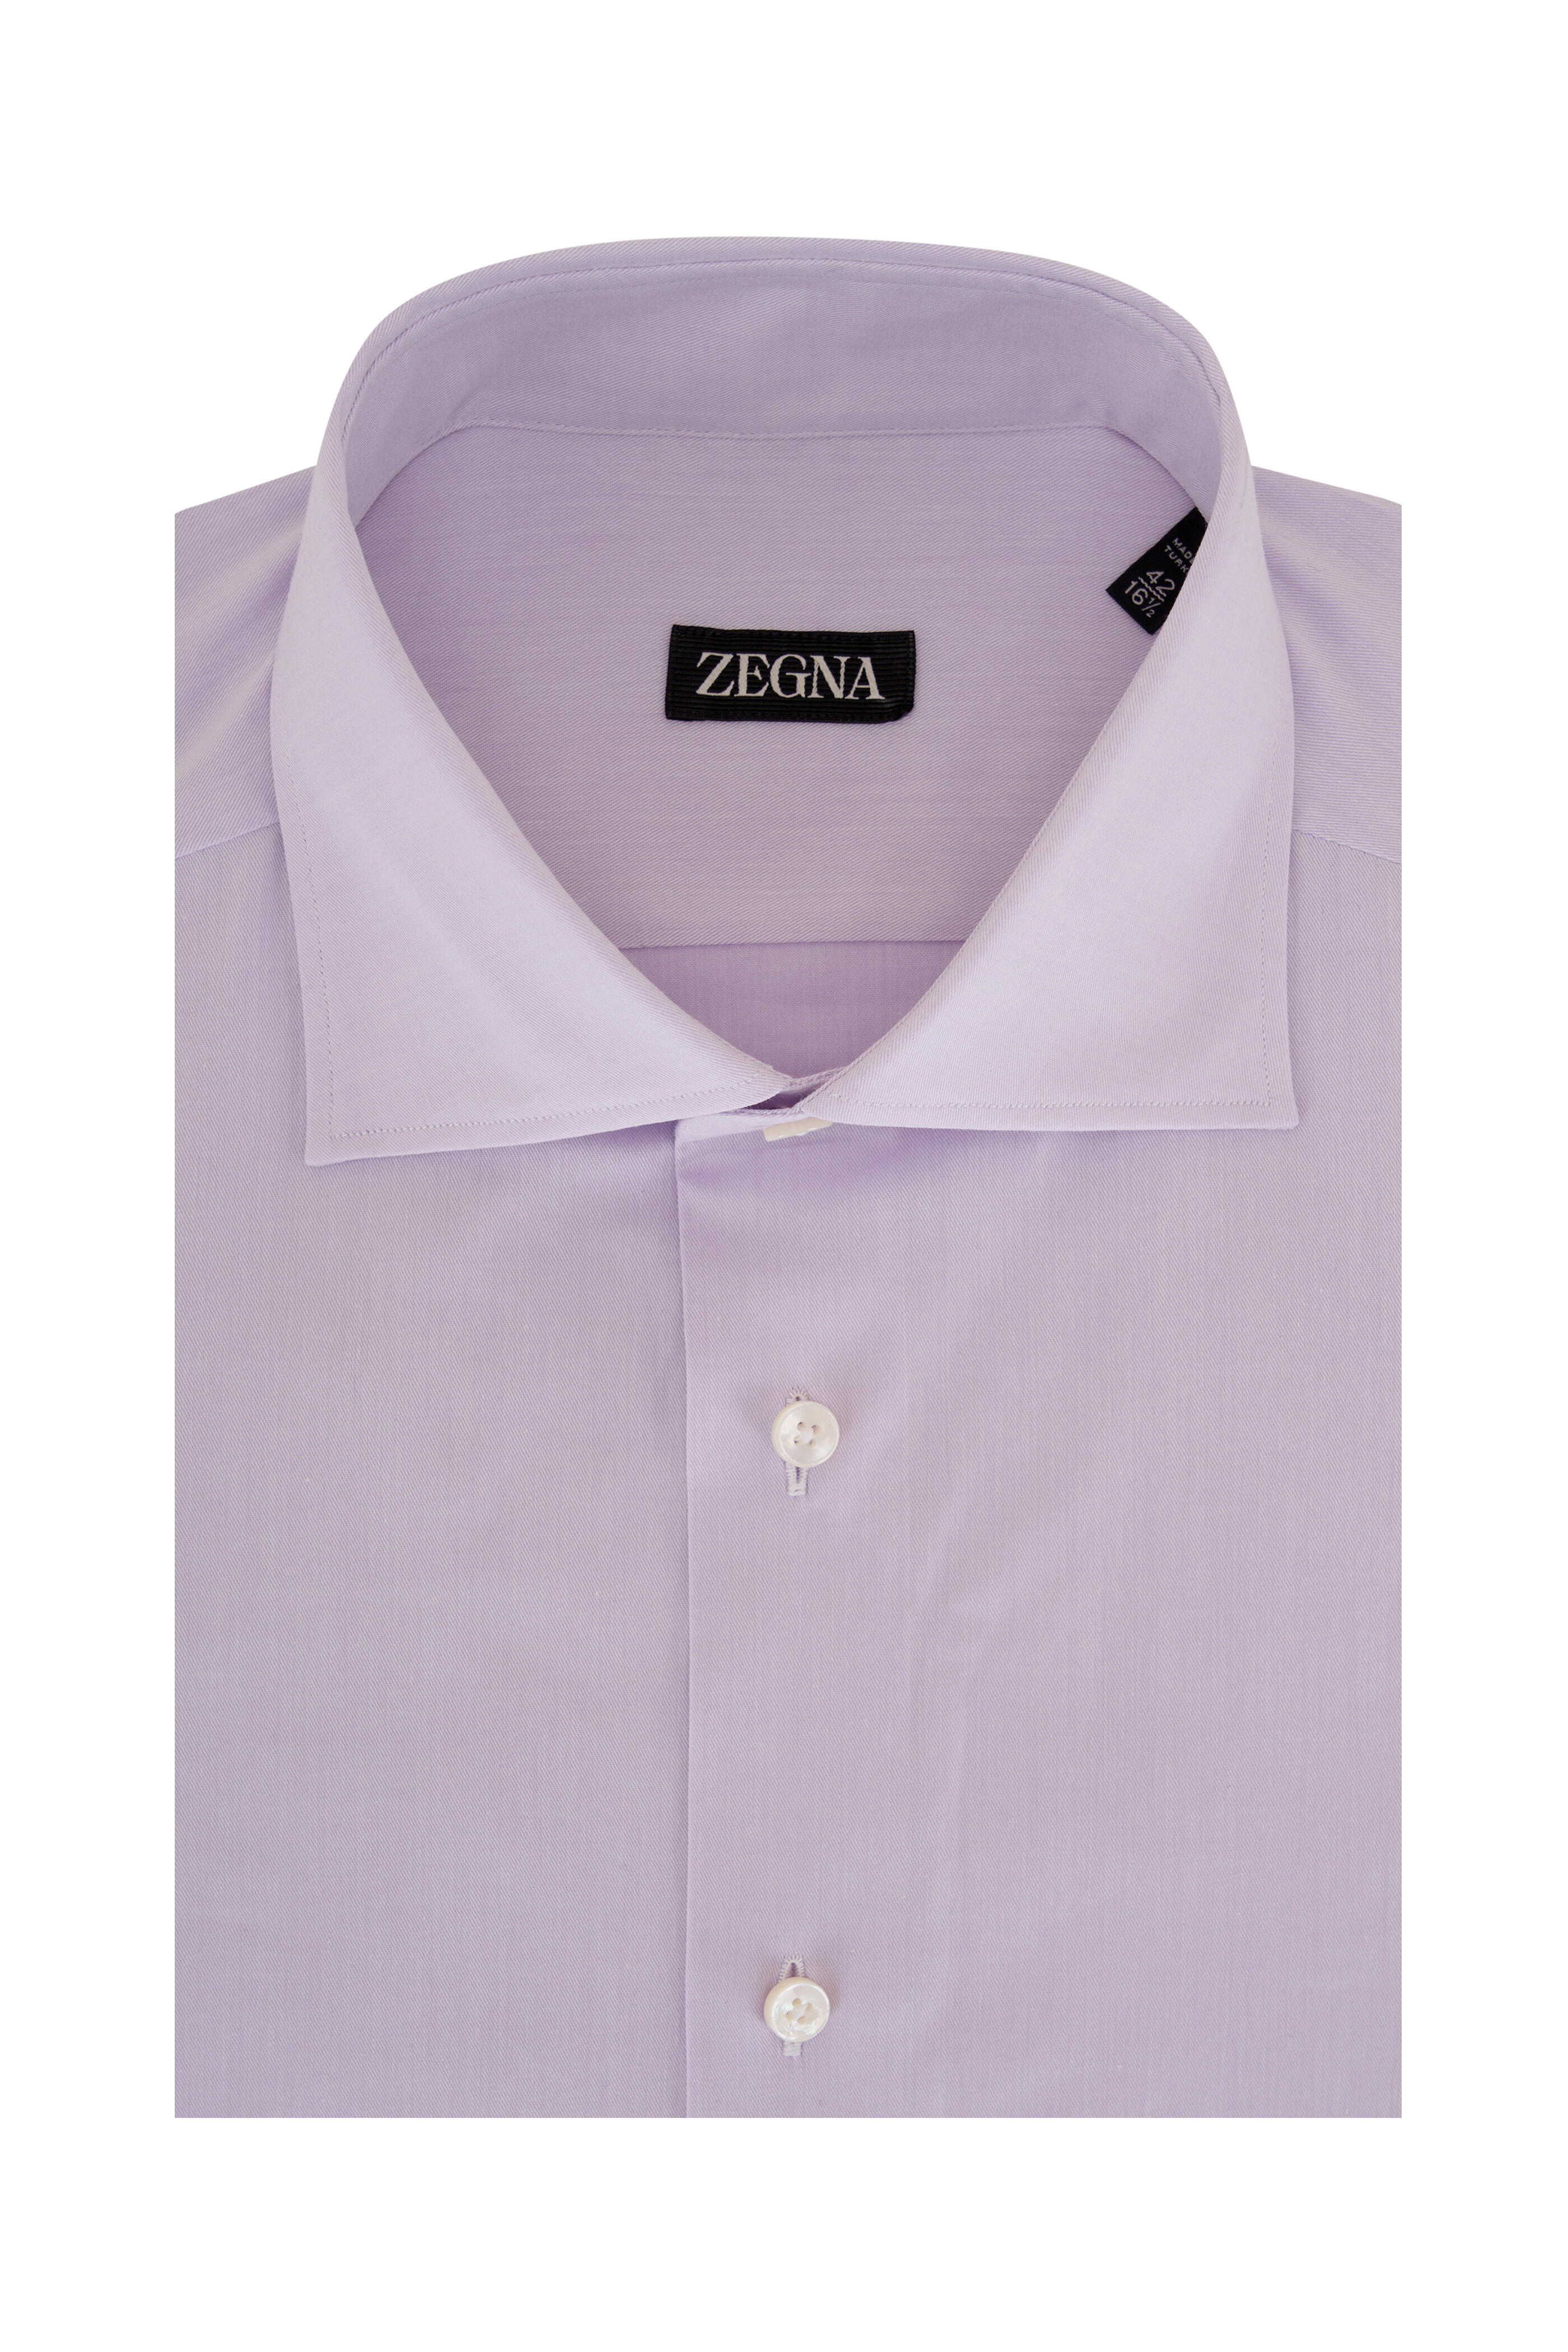 Zegna - Solid Dusty Pink Cotton Dress Shirt | Mitchell Stores